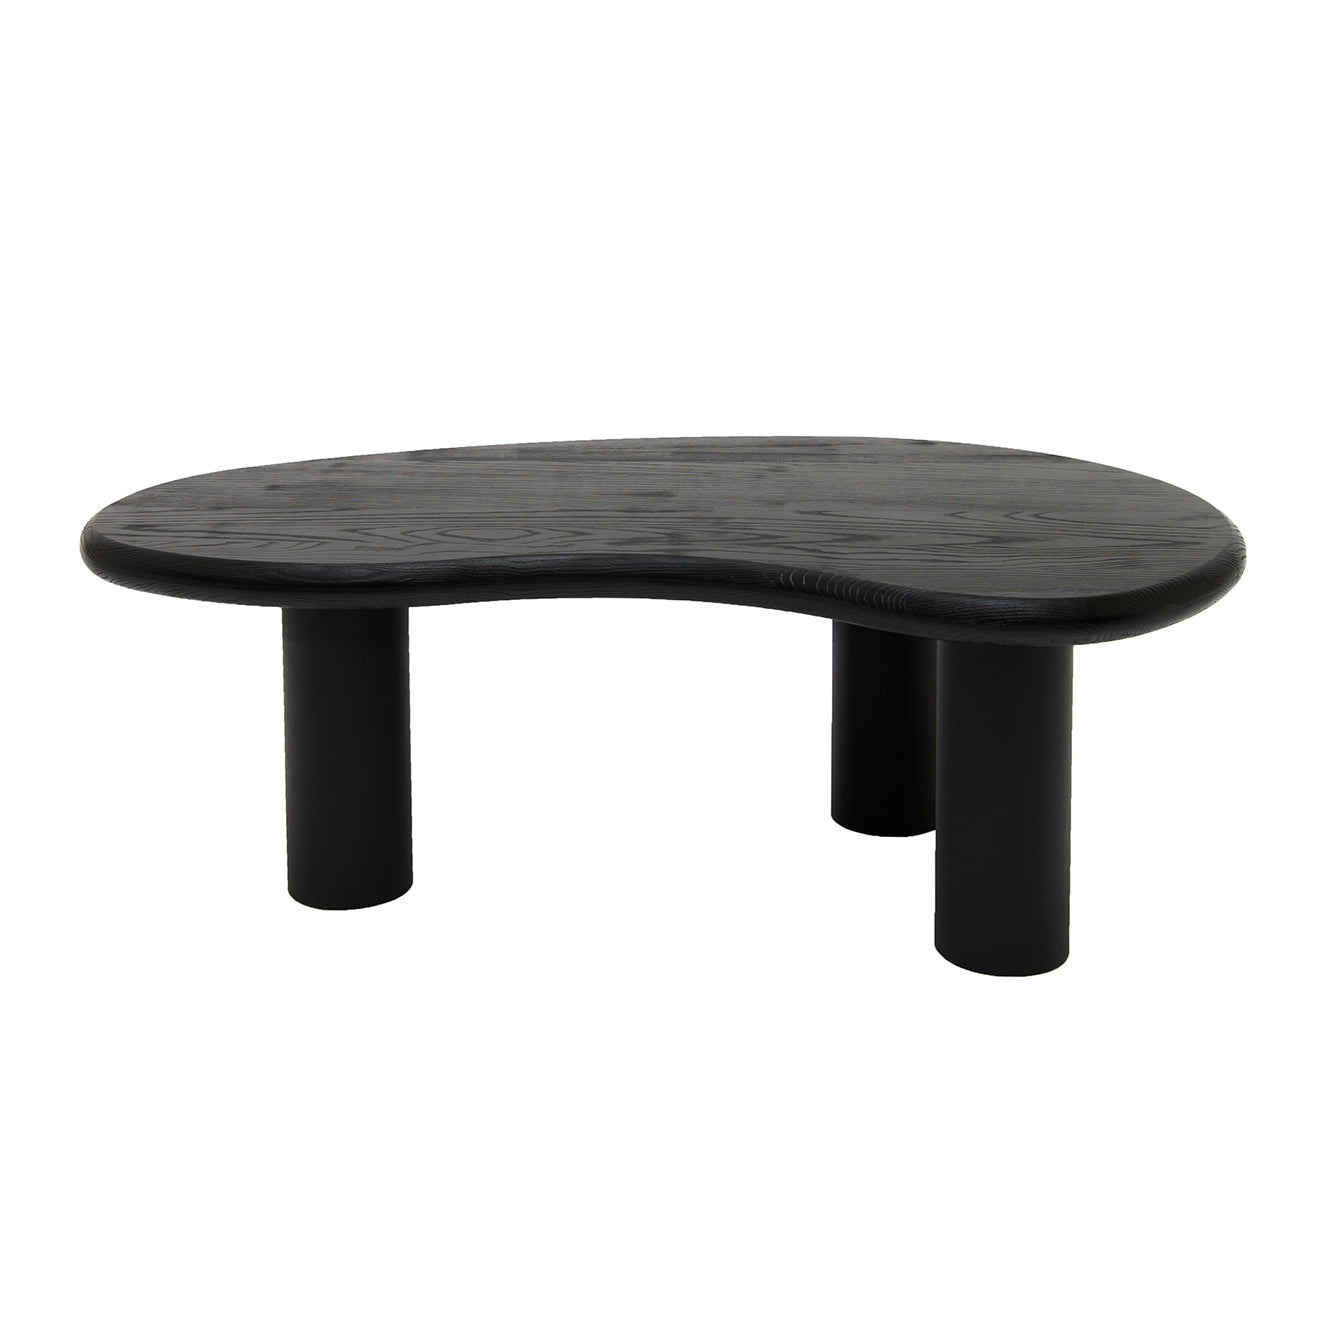 Table basse 061